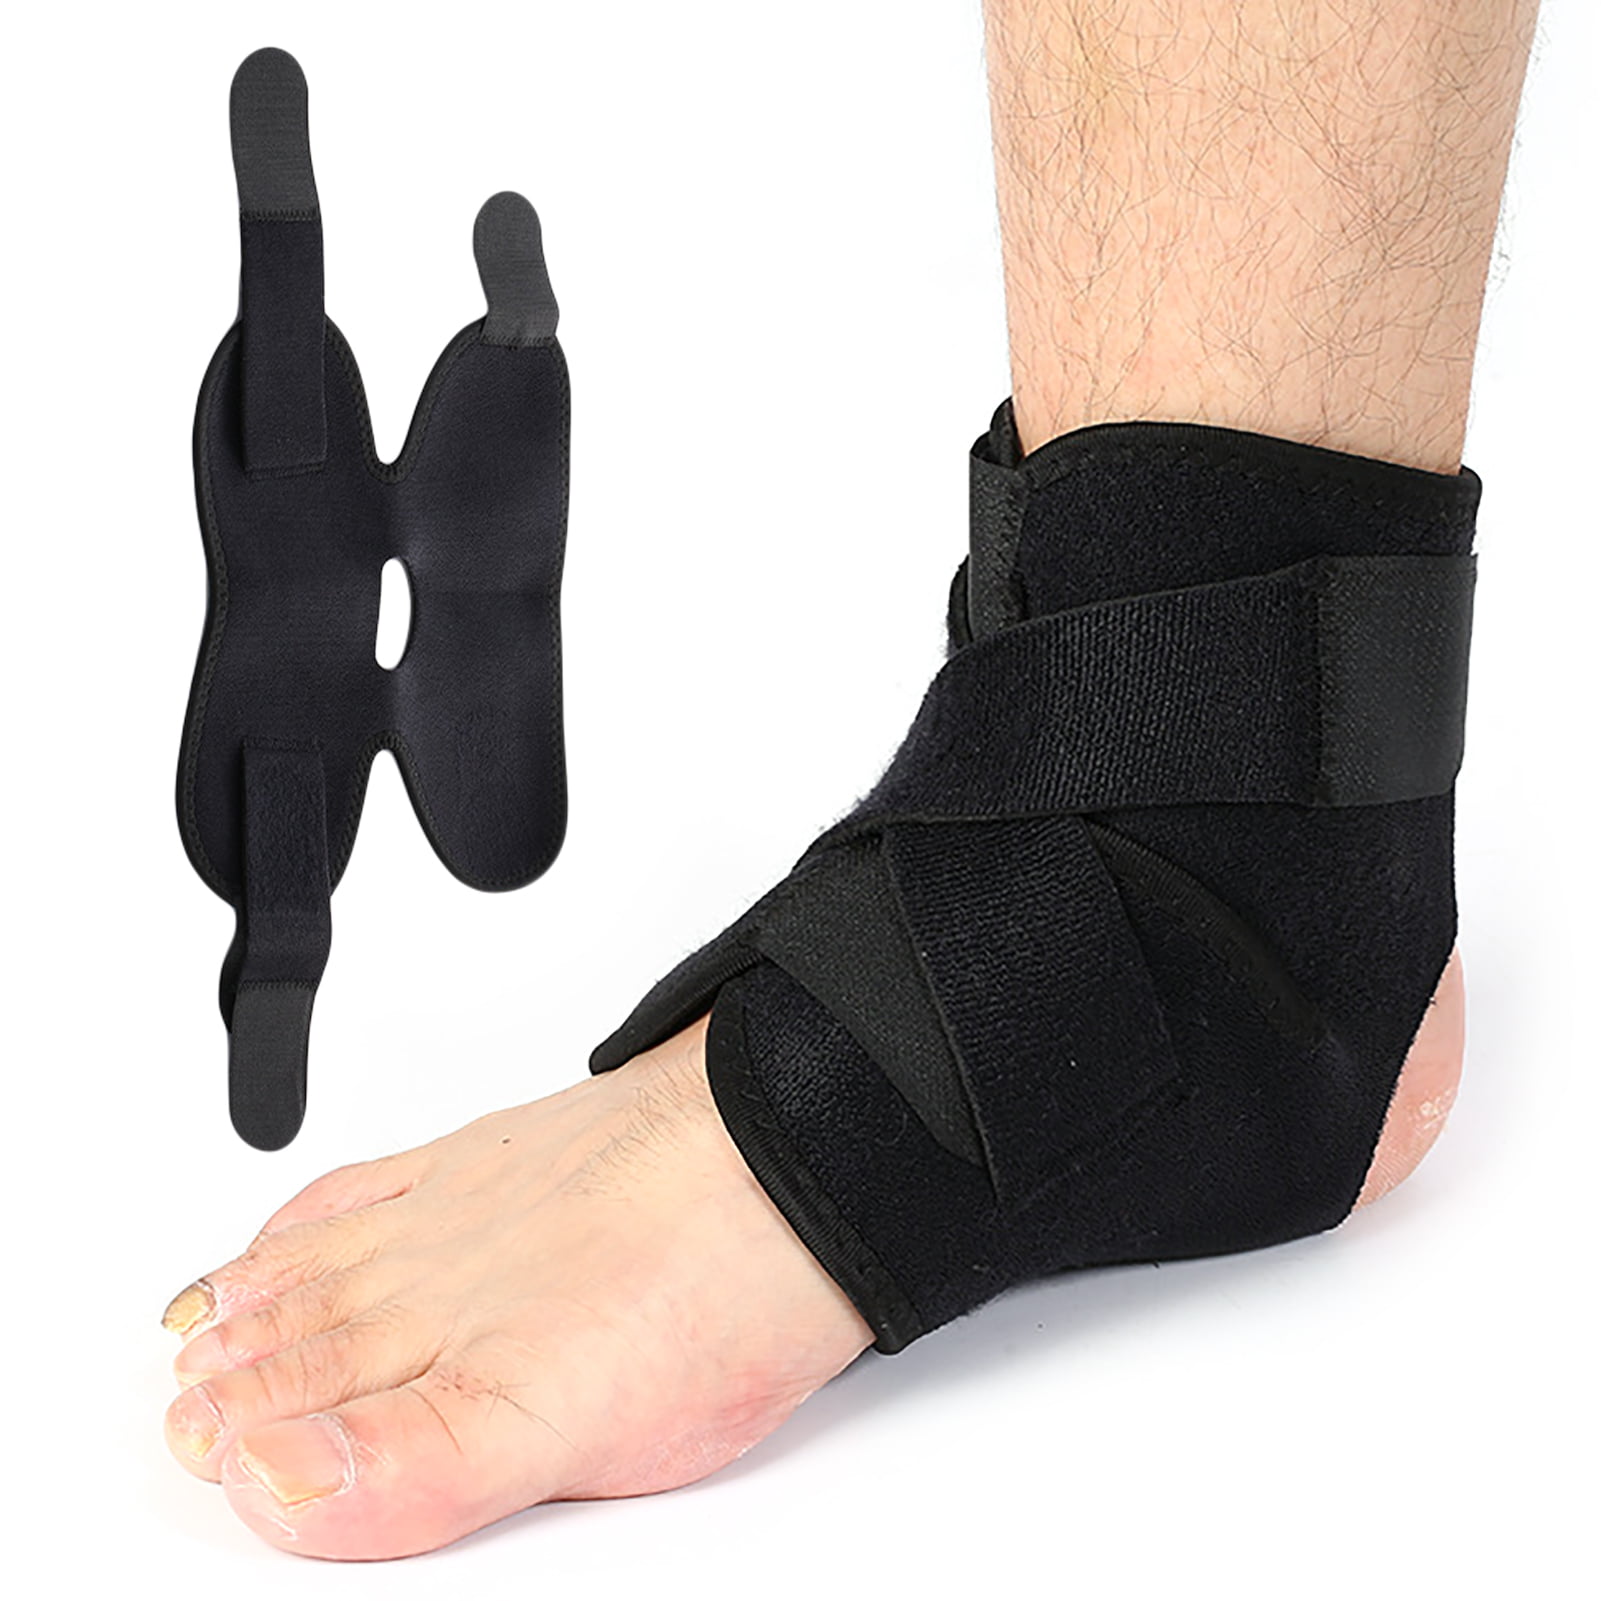 Ankle Support Compression Plantar Fasciitis Sleeves Arch Foot Wrap Brace Safe 